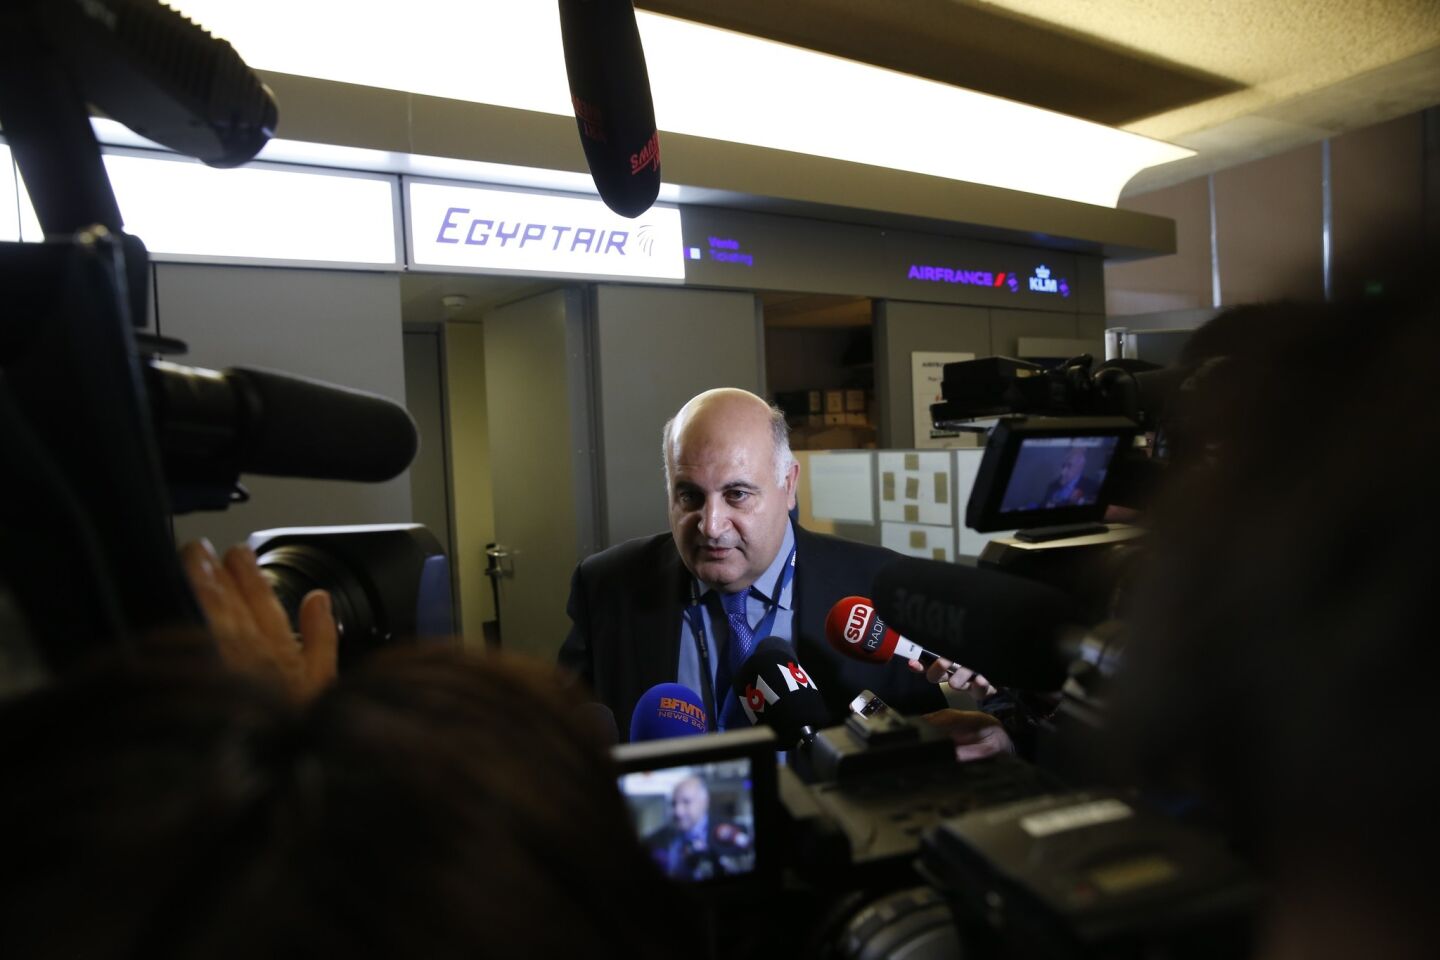 An unidentified employee of EgyptAir speaks to journalists at Charles De Gaulle Airport on May 19, after one of the airline's jets crashed as it traveled from Paris to Cairo.